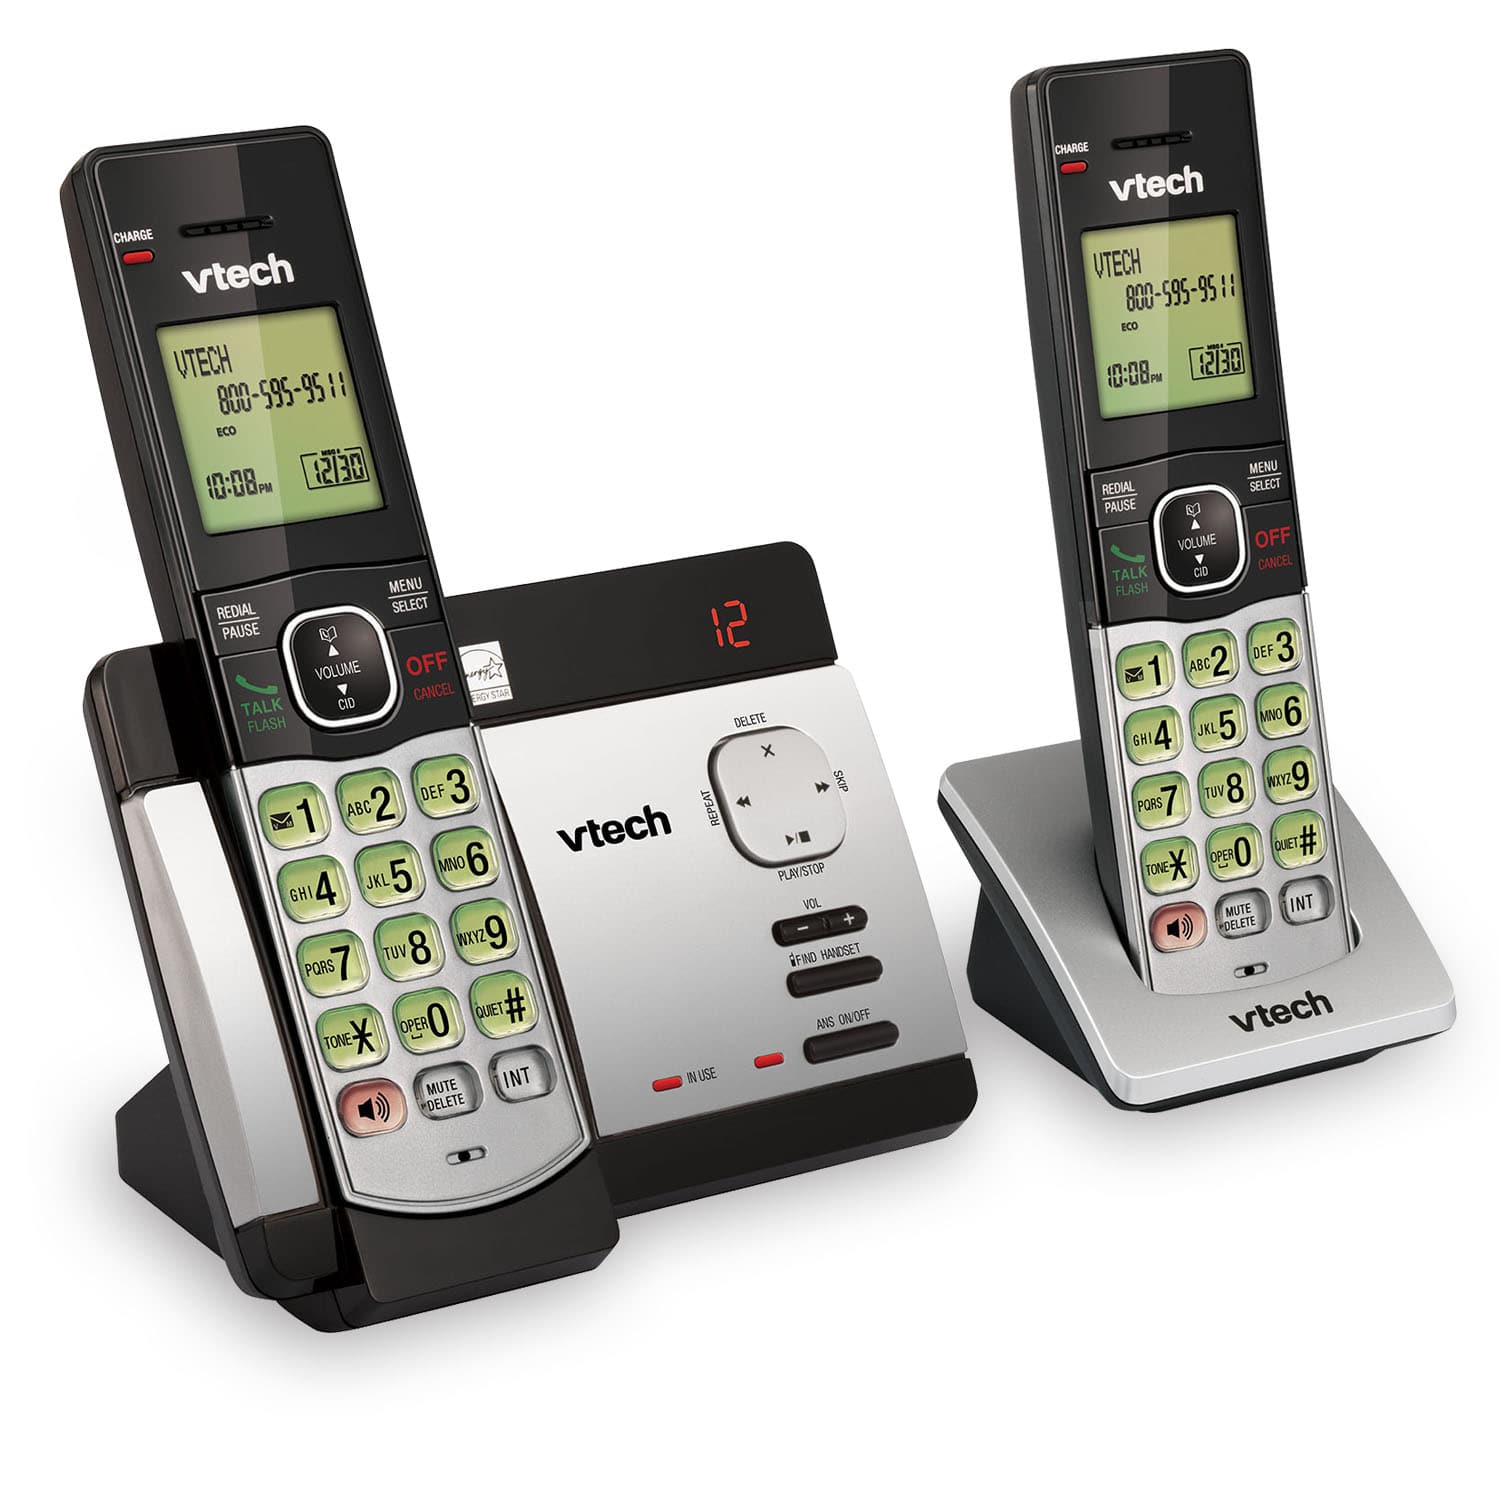 2 Handset Cordless Phone System with Caller ID/Call Waiting - view 3